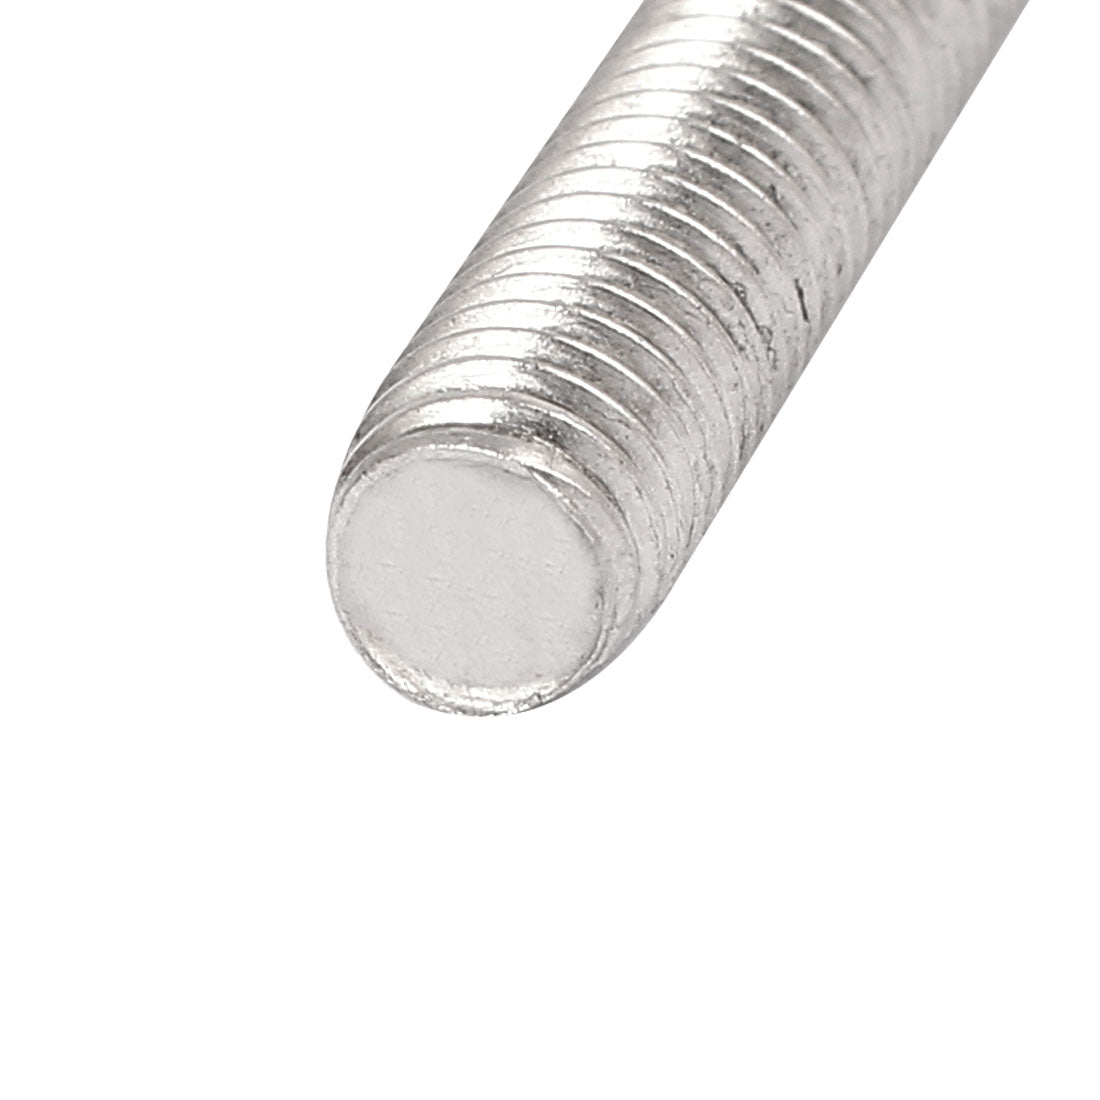 uxcell Uxcell M8 x 80mm 1.25mm Pitch 304 Stainless Steel Fully Threaded Rods Hardware 20 Pcs